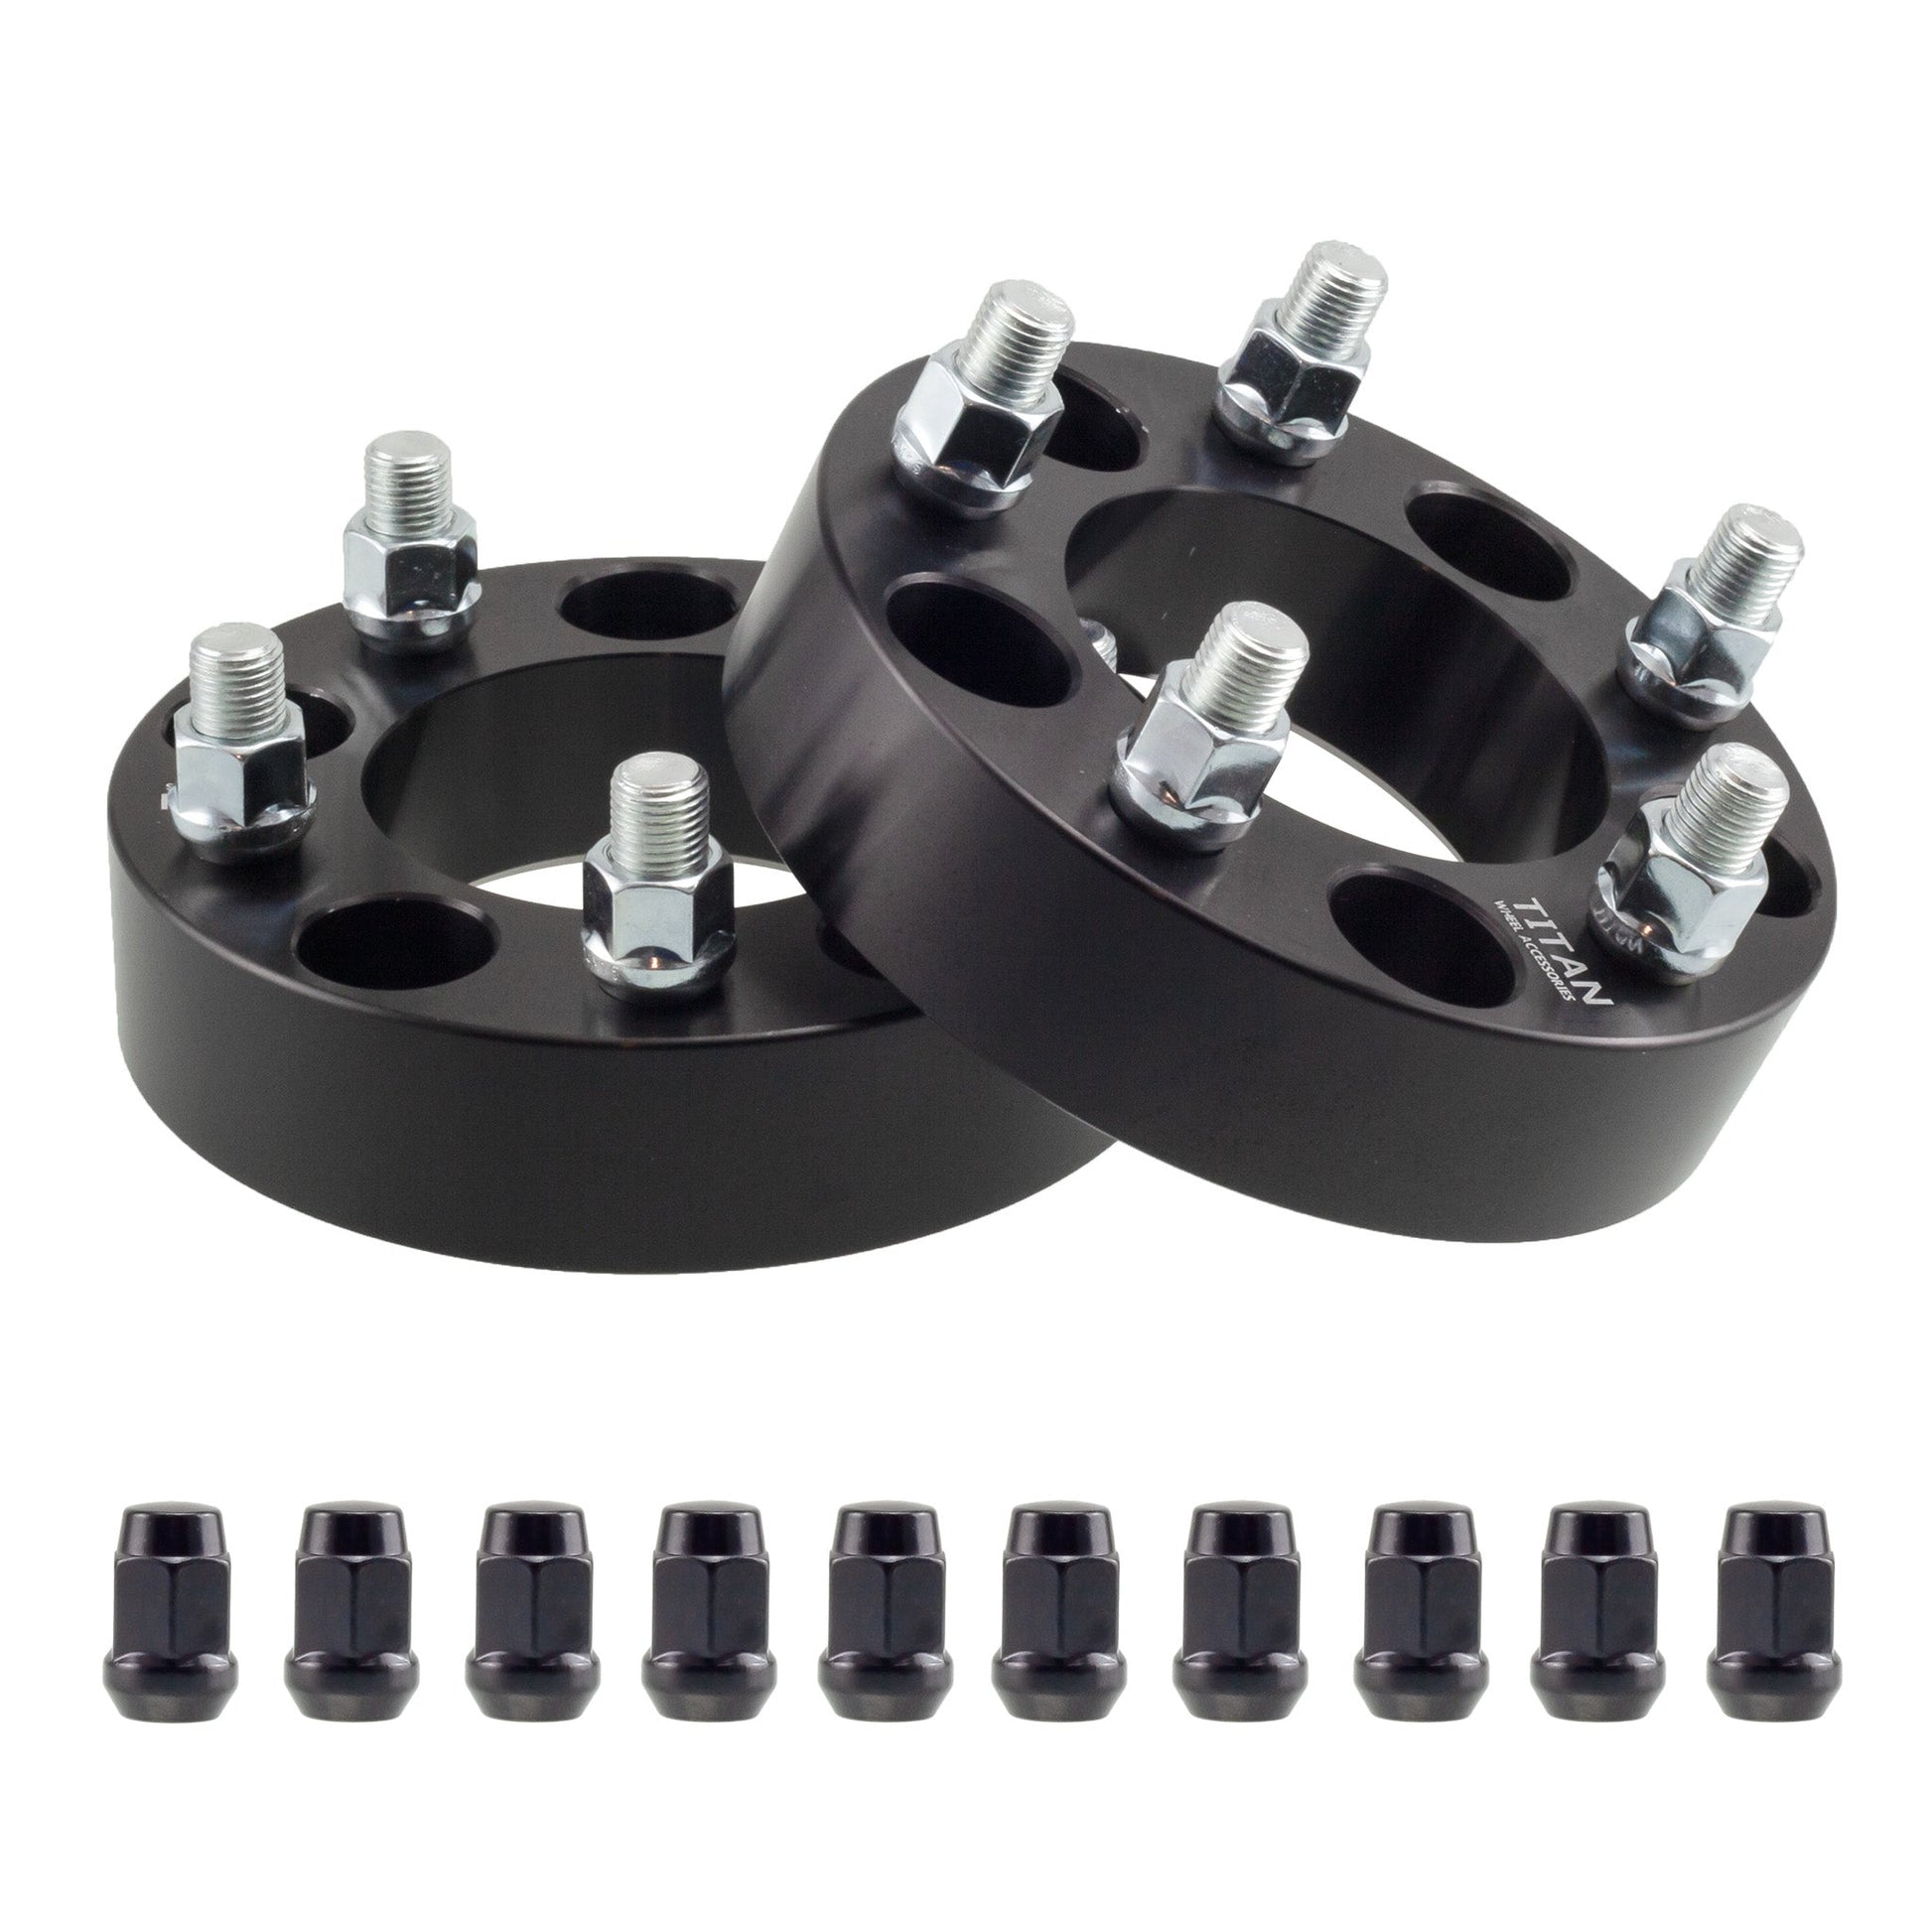 1" (25mm) Titan Wheel Spacers for Ford Mustang Ranger Explorer | 5x4.5 | 70.5 Hubcentric | 1/2x20 Thread Pitch | Titan Wheel Accessories